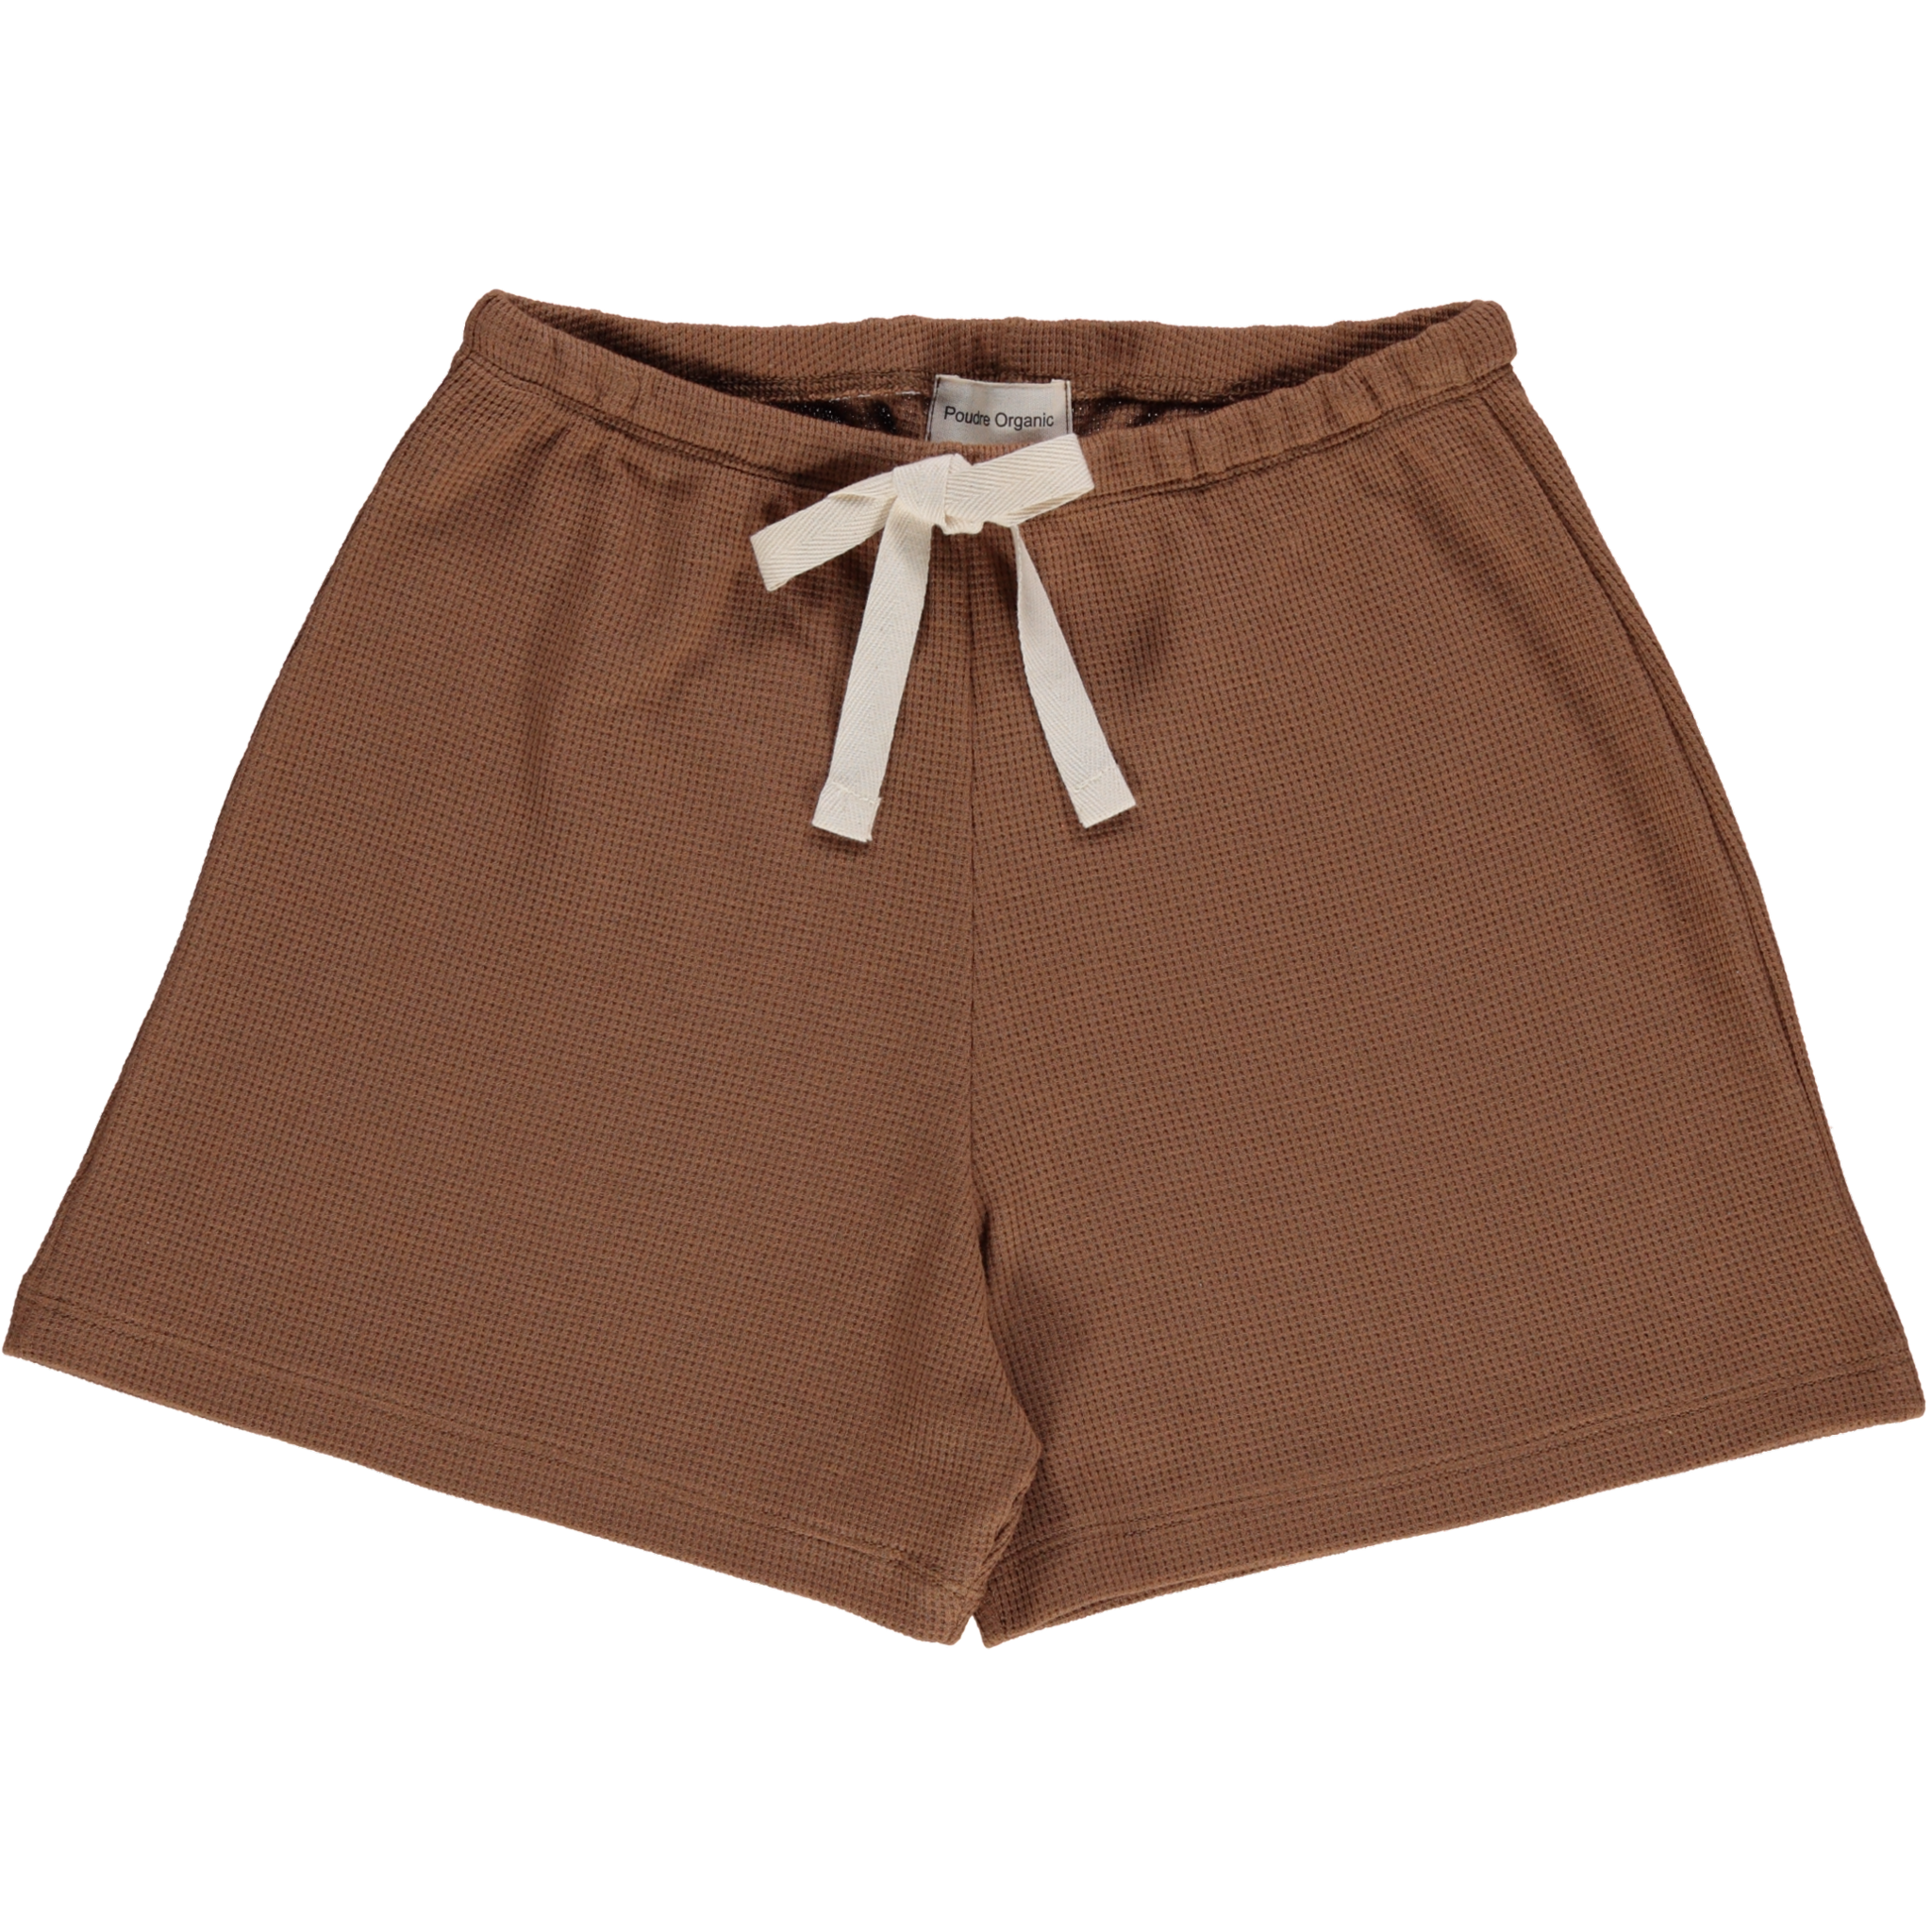 Hortensia honeycomb shorts Nuthatch - Poudre Organic – poudreorganic